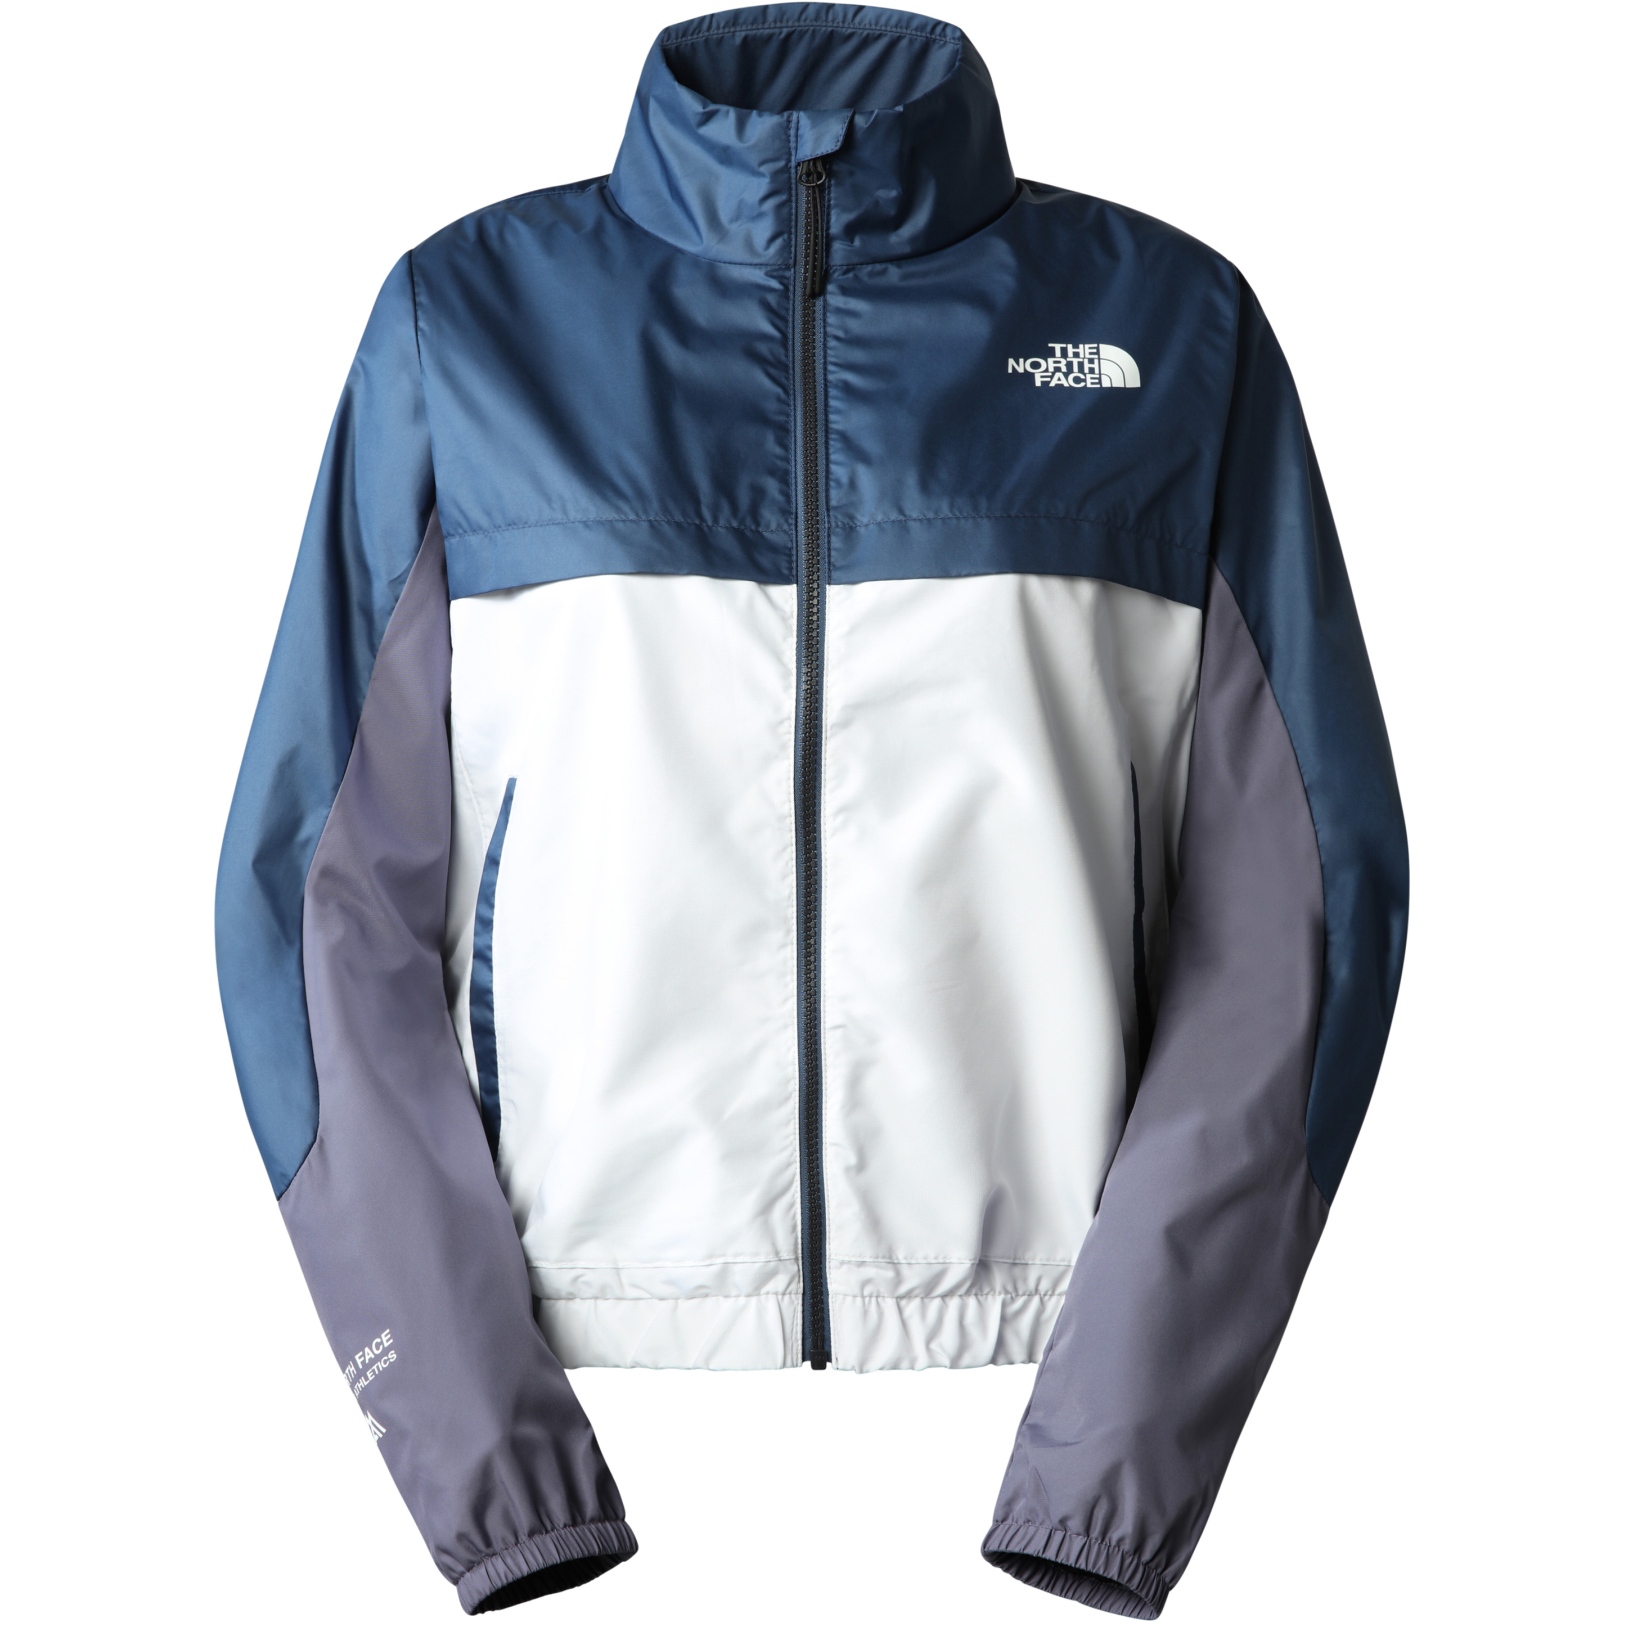 Productfoto van The North Face Mountain Athletics Windjas Dames - TNF White/Lunar Slate/Shady Blue